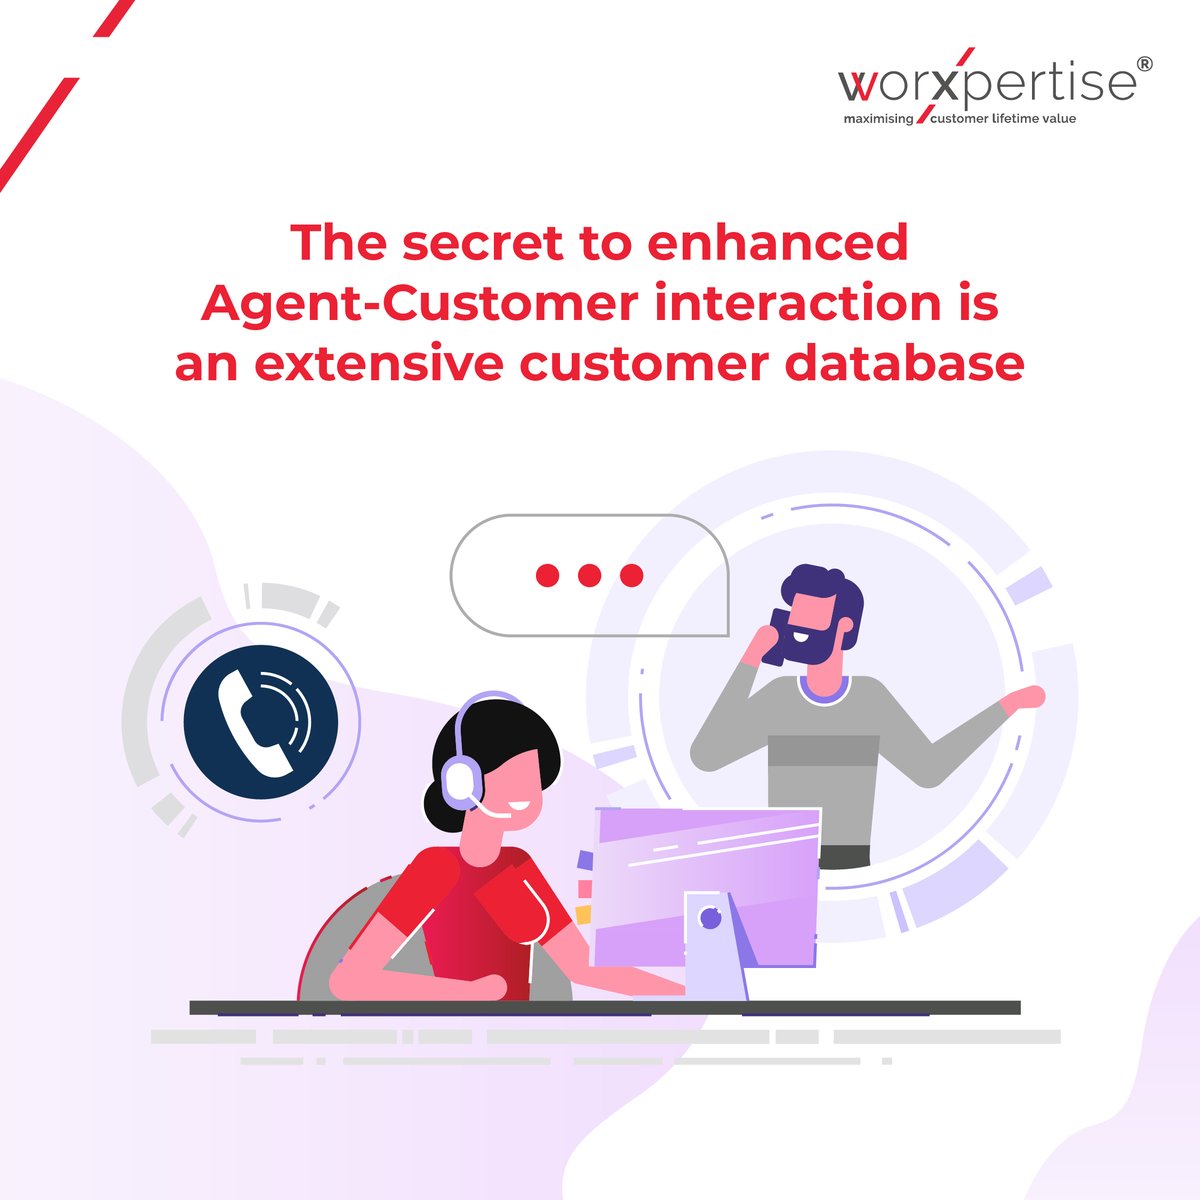 A Zendesk report states that 58% of customer support representatives believe that a lack of customer data results in negative CX.

#CustomerLifetimeValue #softwaresolutions #customerexperience #future #innovation #businessmodel #learnings #strategy #businesstransformation #CX